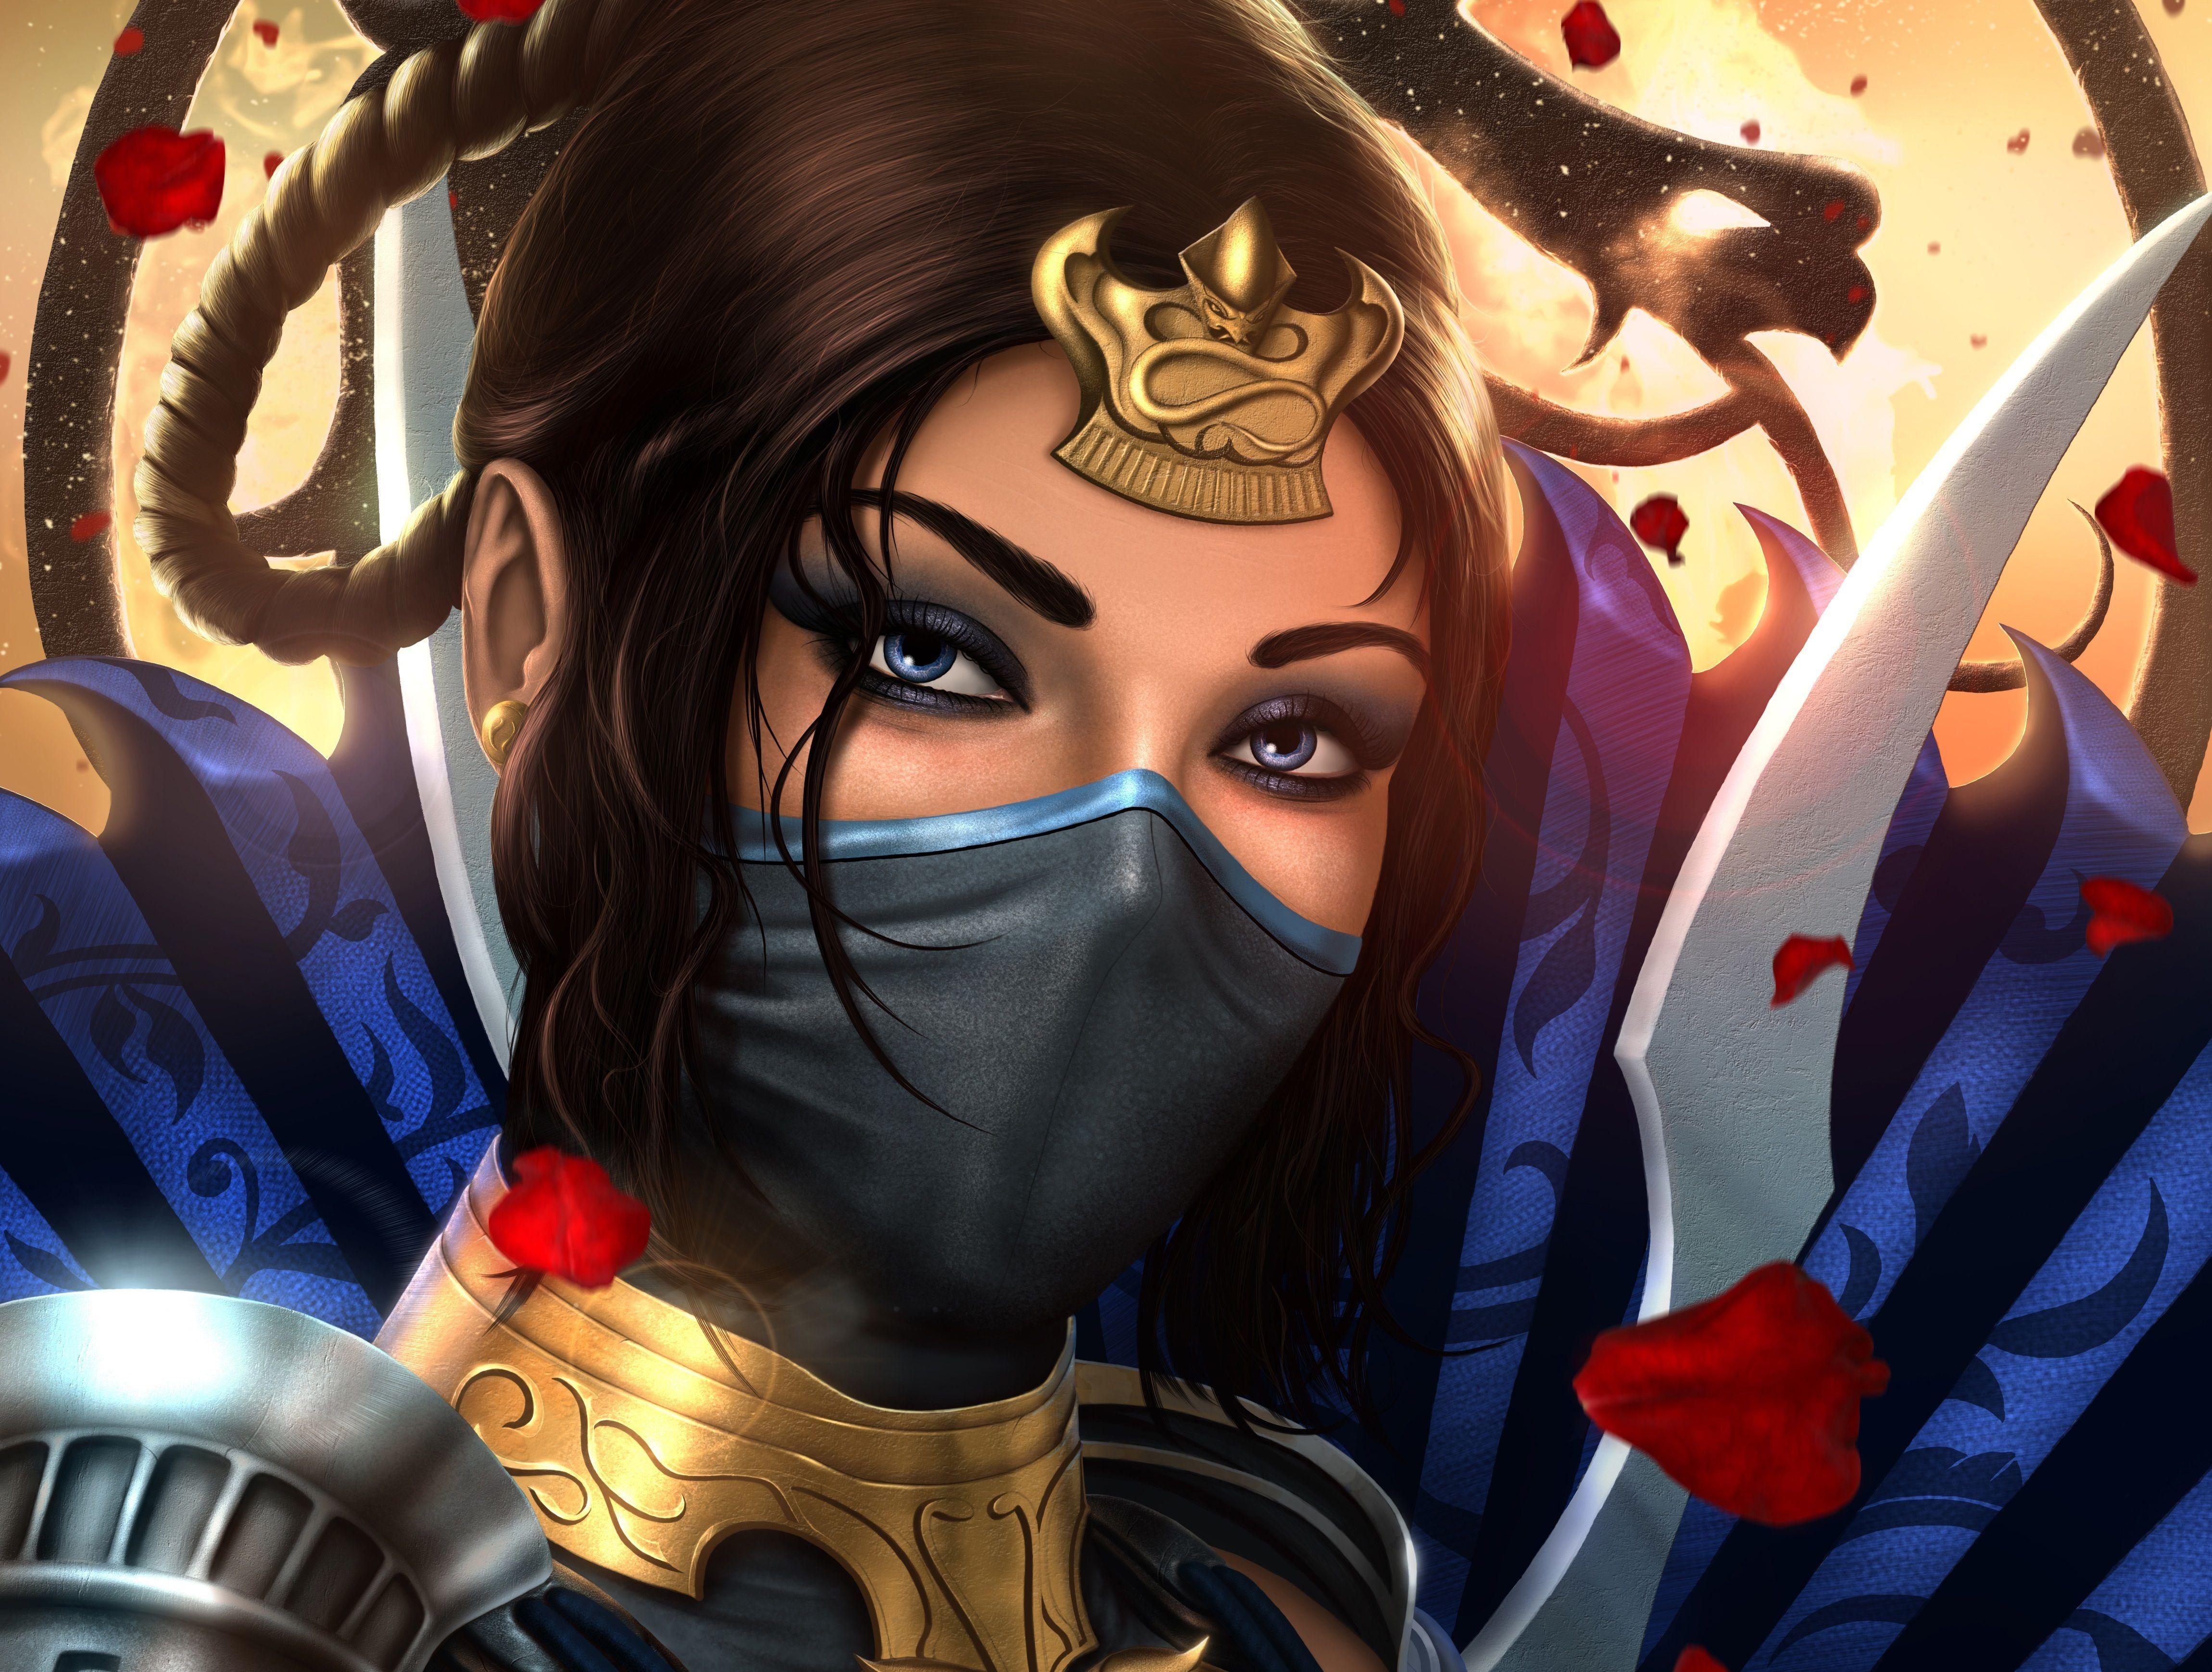 Kitana Wallpaper 4k resolution made by me If you want you can use it  Please do credit me if you use it I recreated the entire pose manually   rMortalKombat